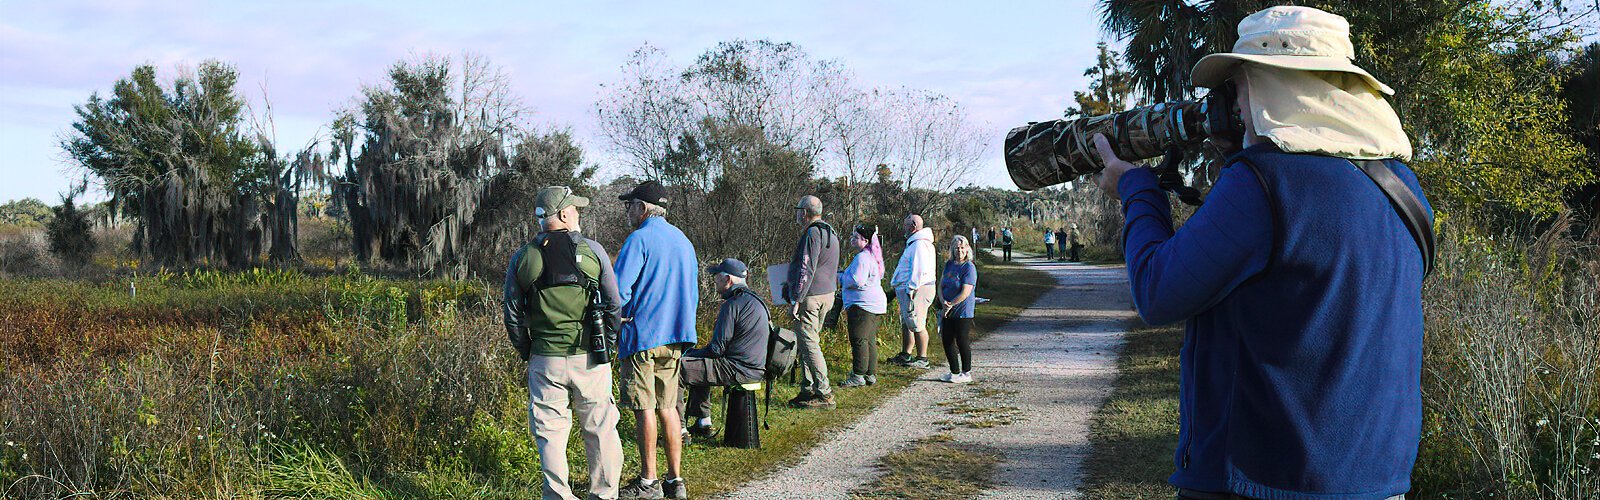 Circle B Bar Reserve is widely enjoyed by photographers and birders for its variety of migrant and resident birds. In 2008, the reserve was added to the Great Florida Birding Trail.